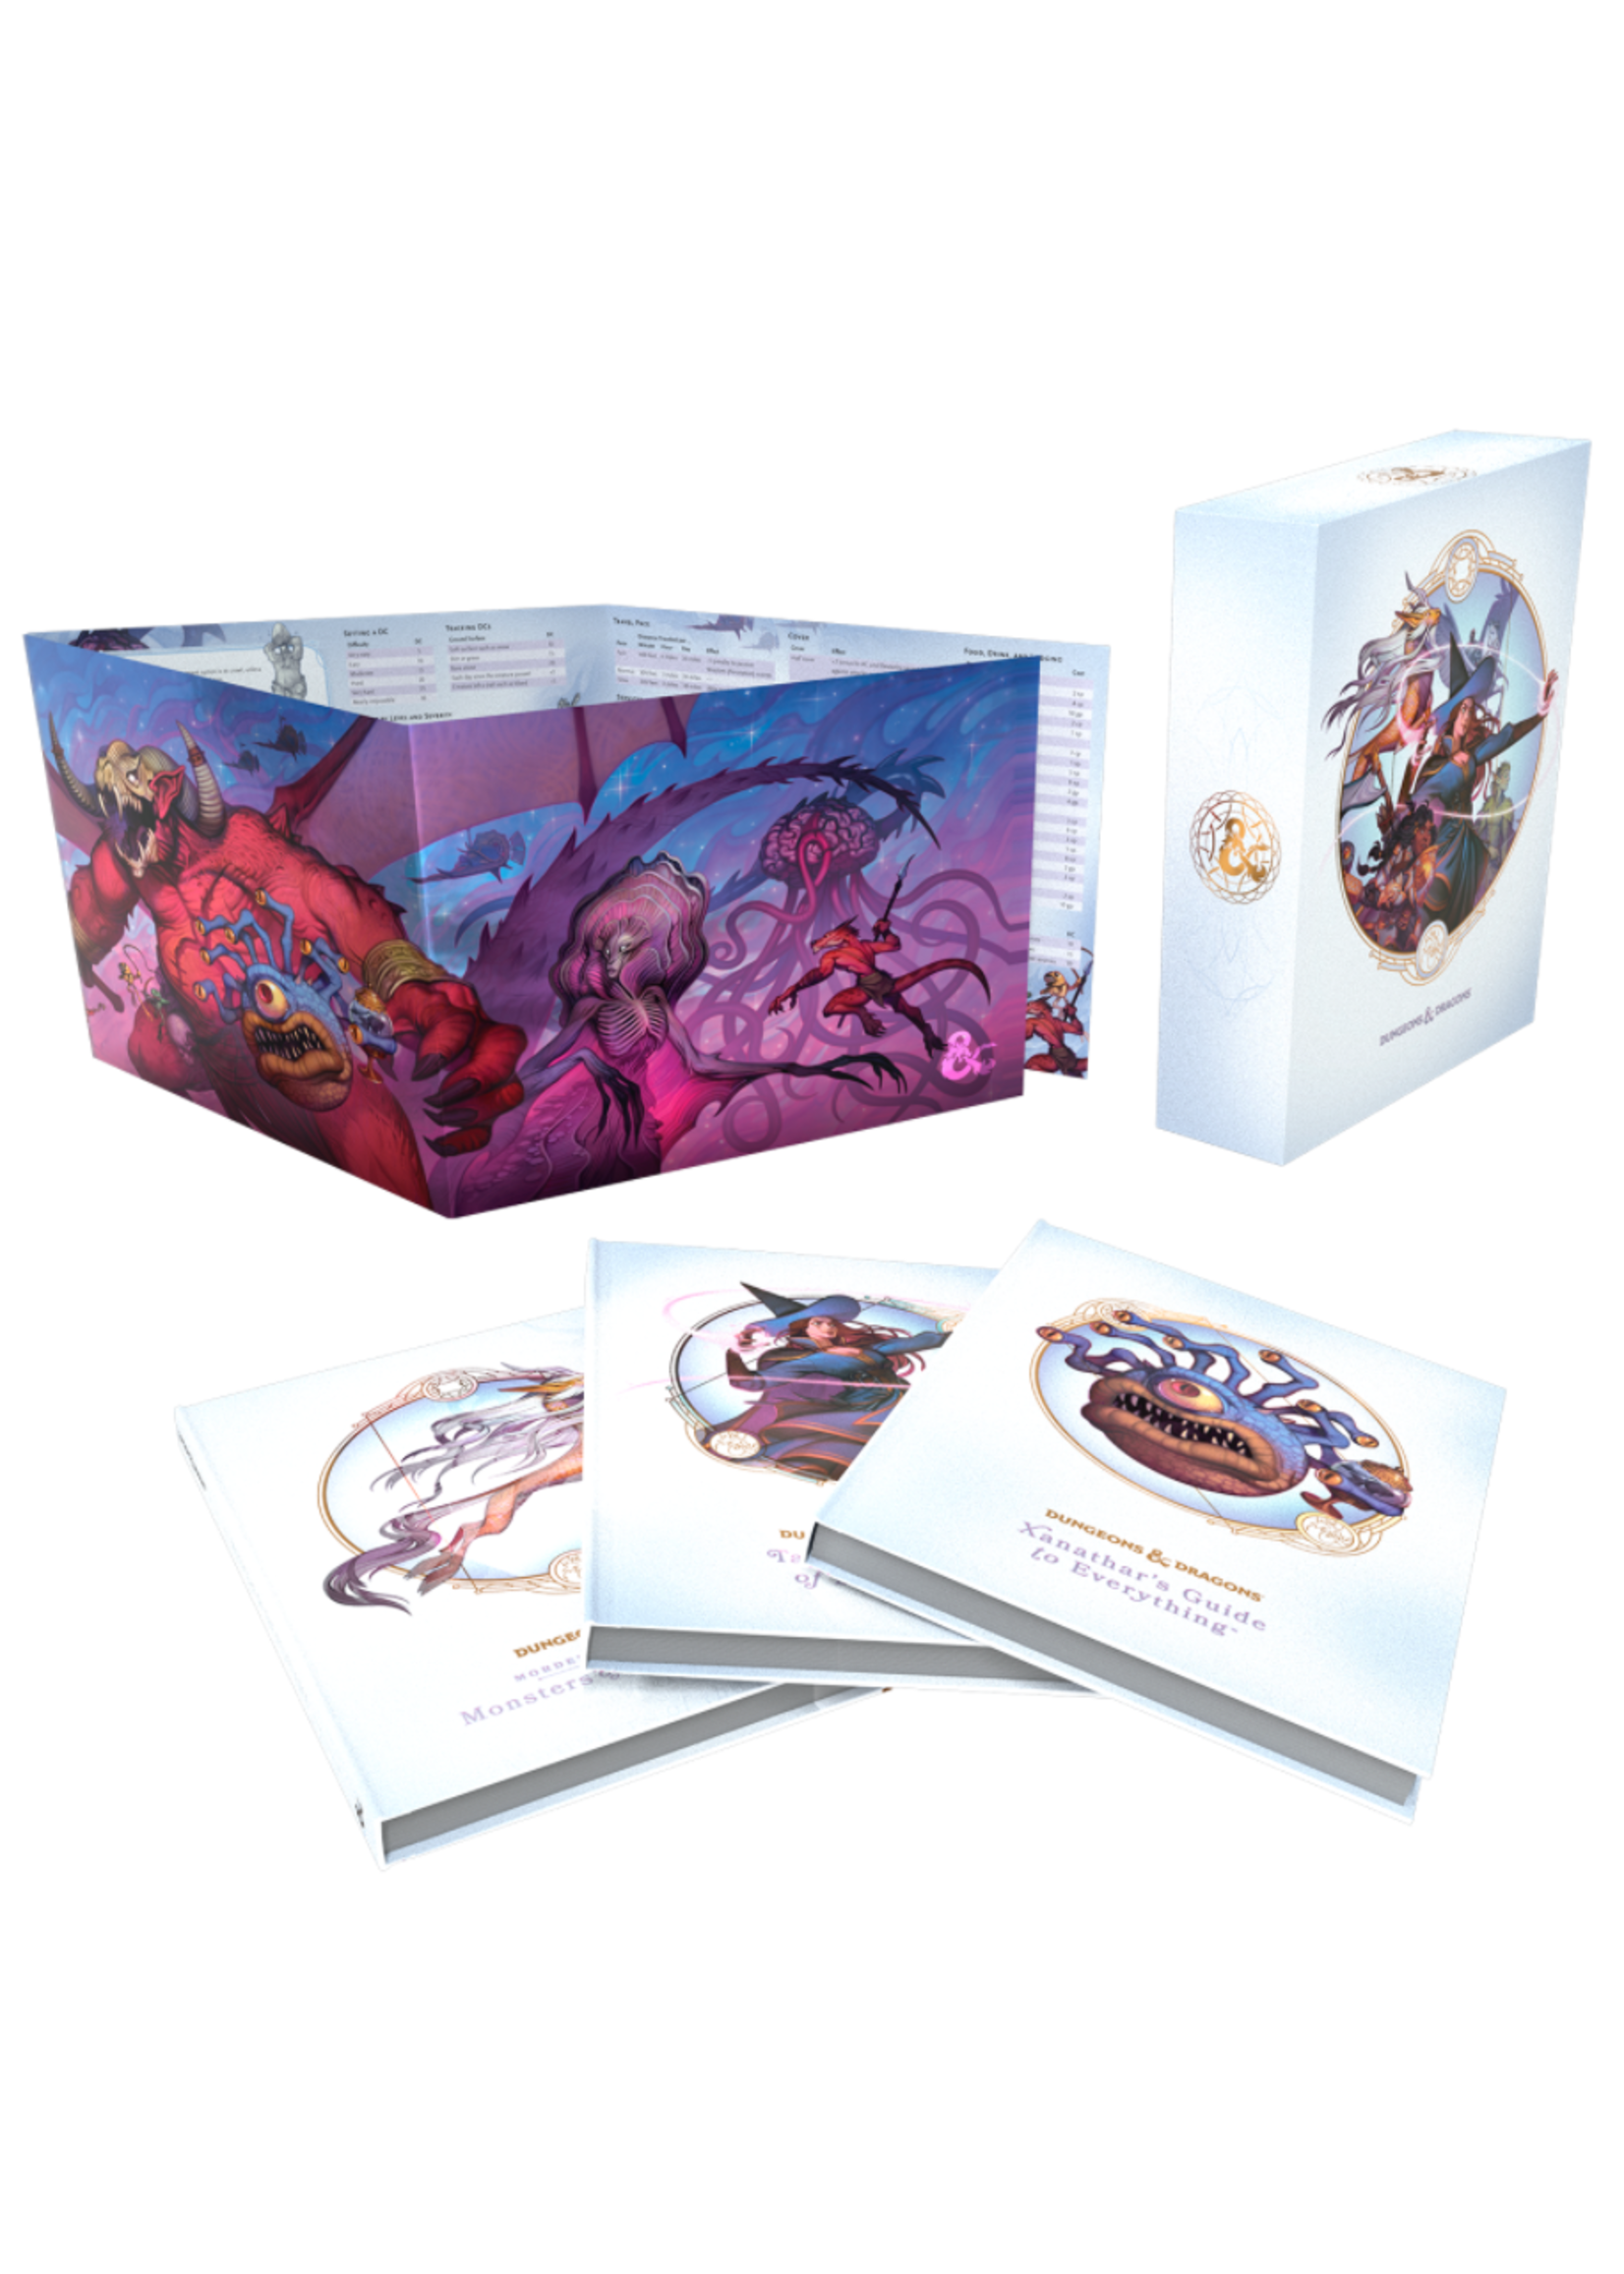 Wizards of the Coast Dungeons & Dragons RPG: Rules Expansion Gift Set Hobby Cover